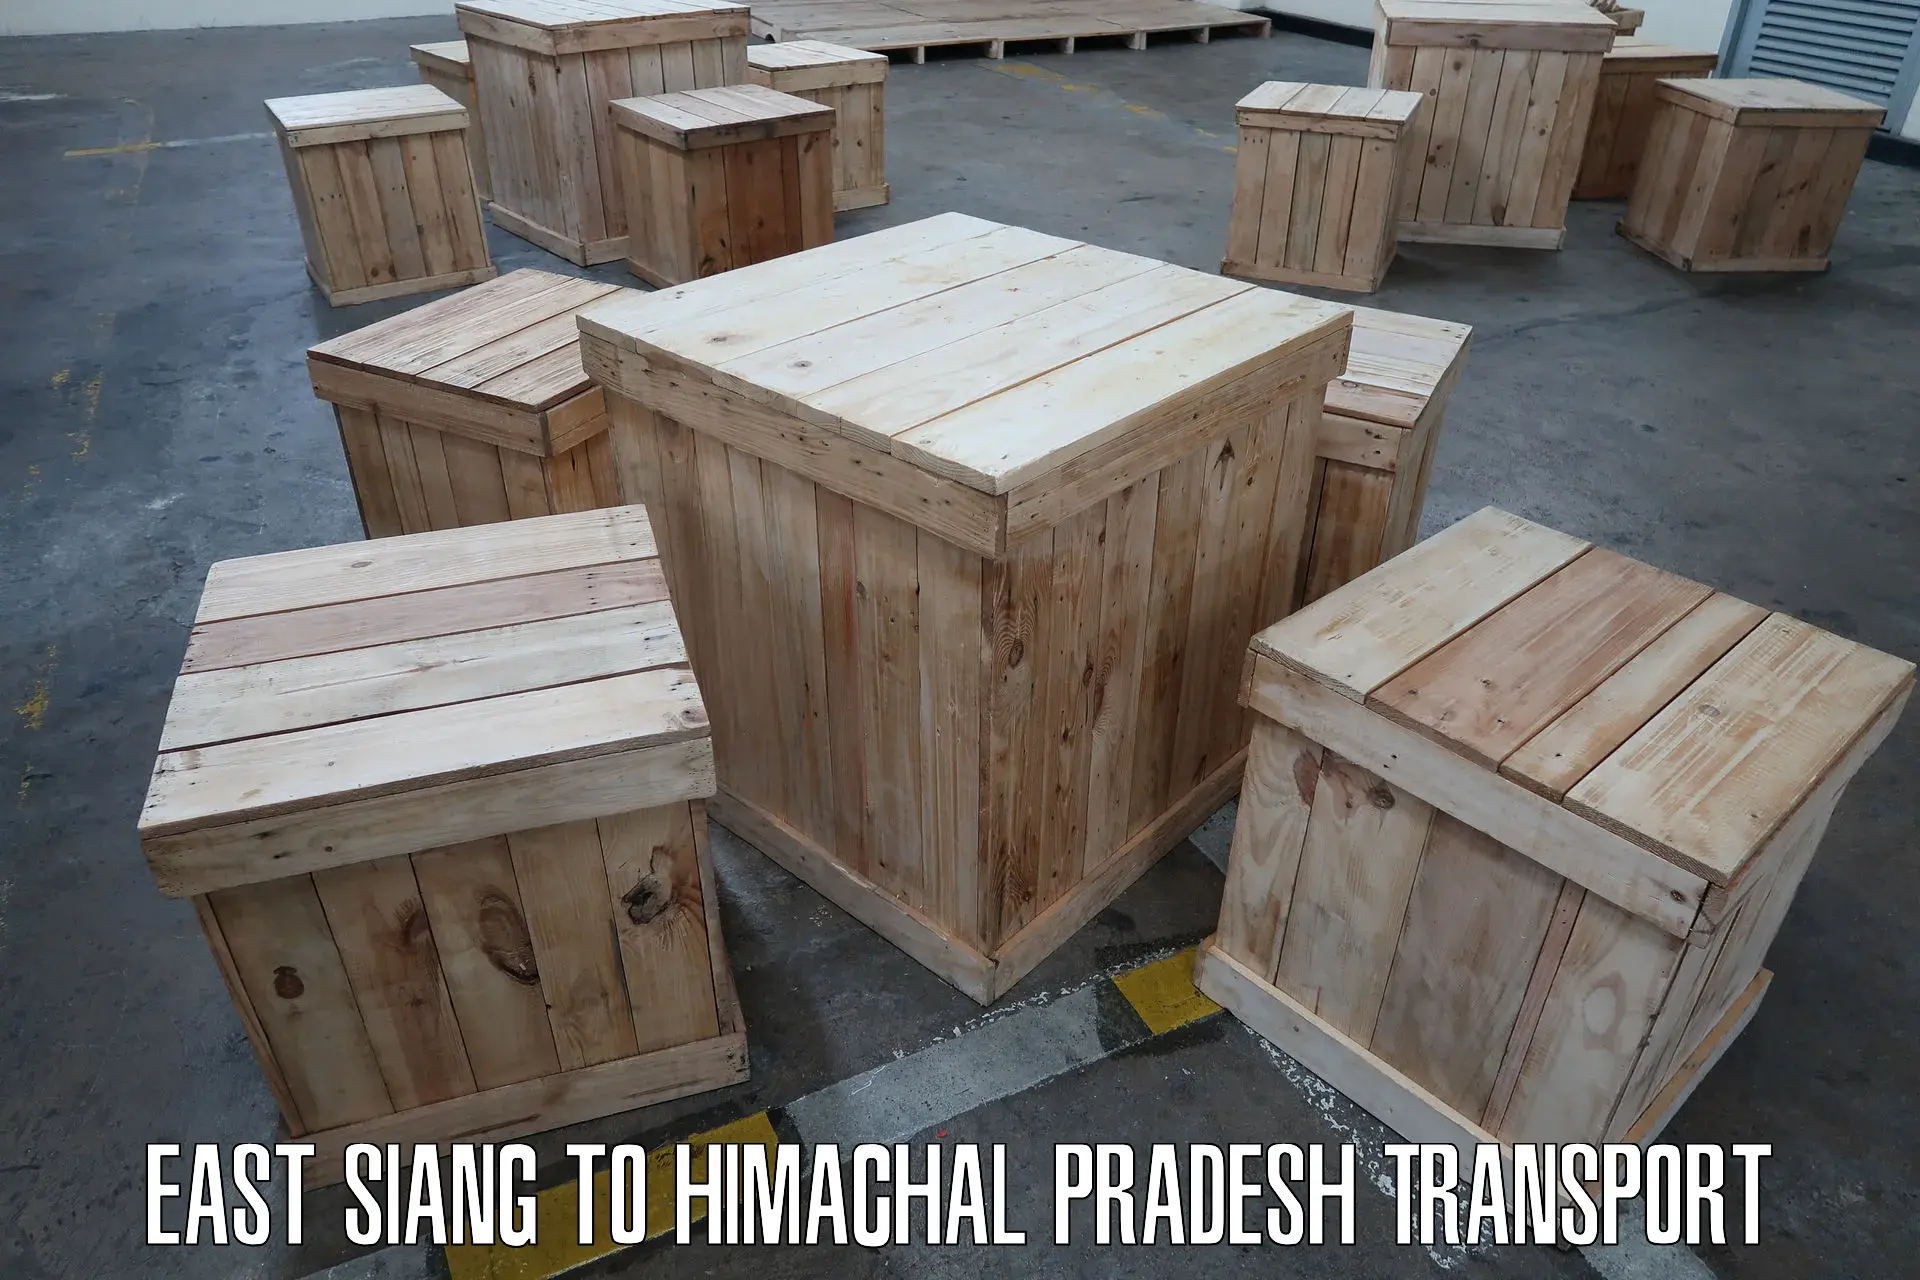 Domestic goods transportation services East Siang to Una Himachal Pradesh